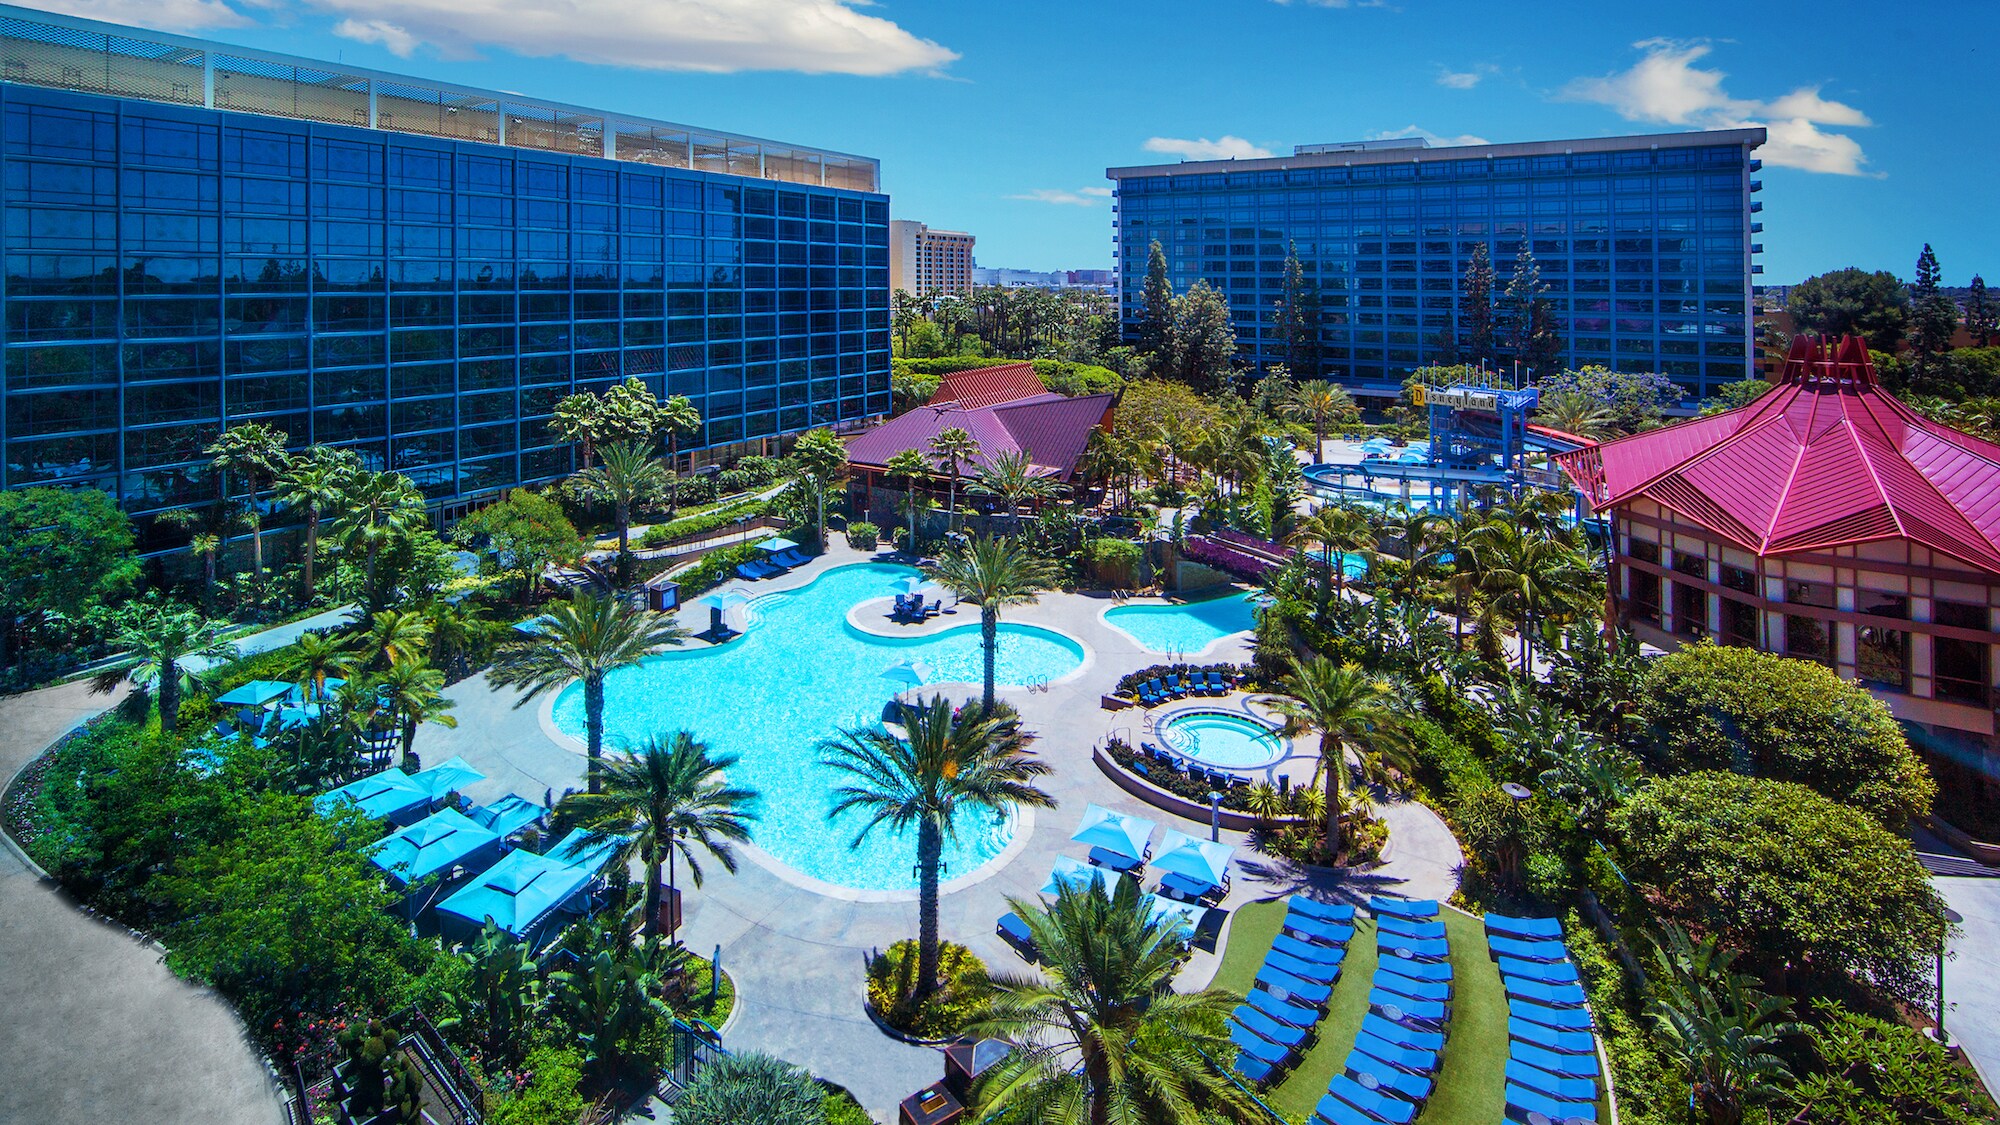 Image of the pool at the Disneyland Hotel.